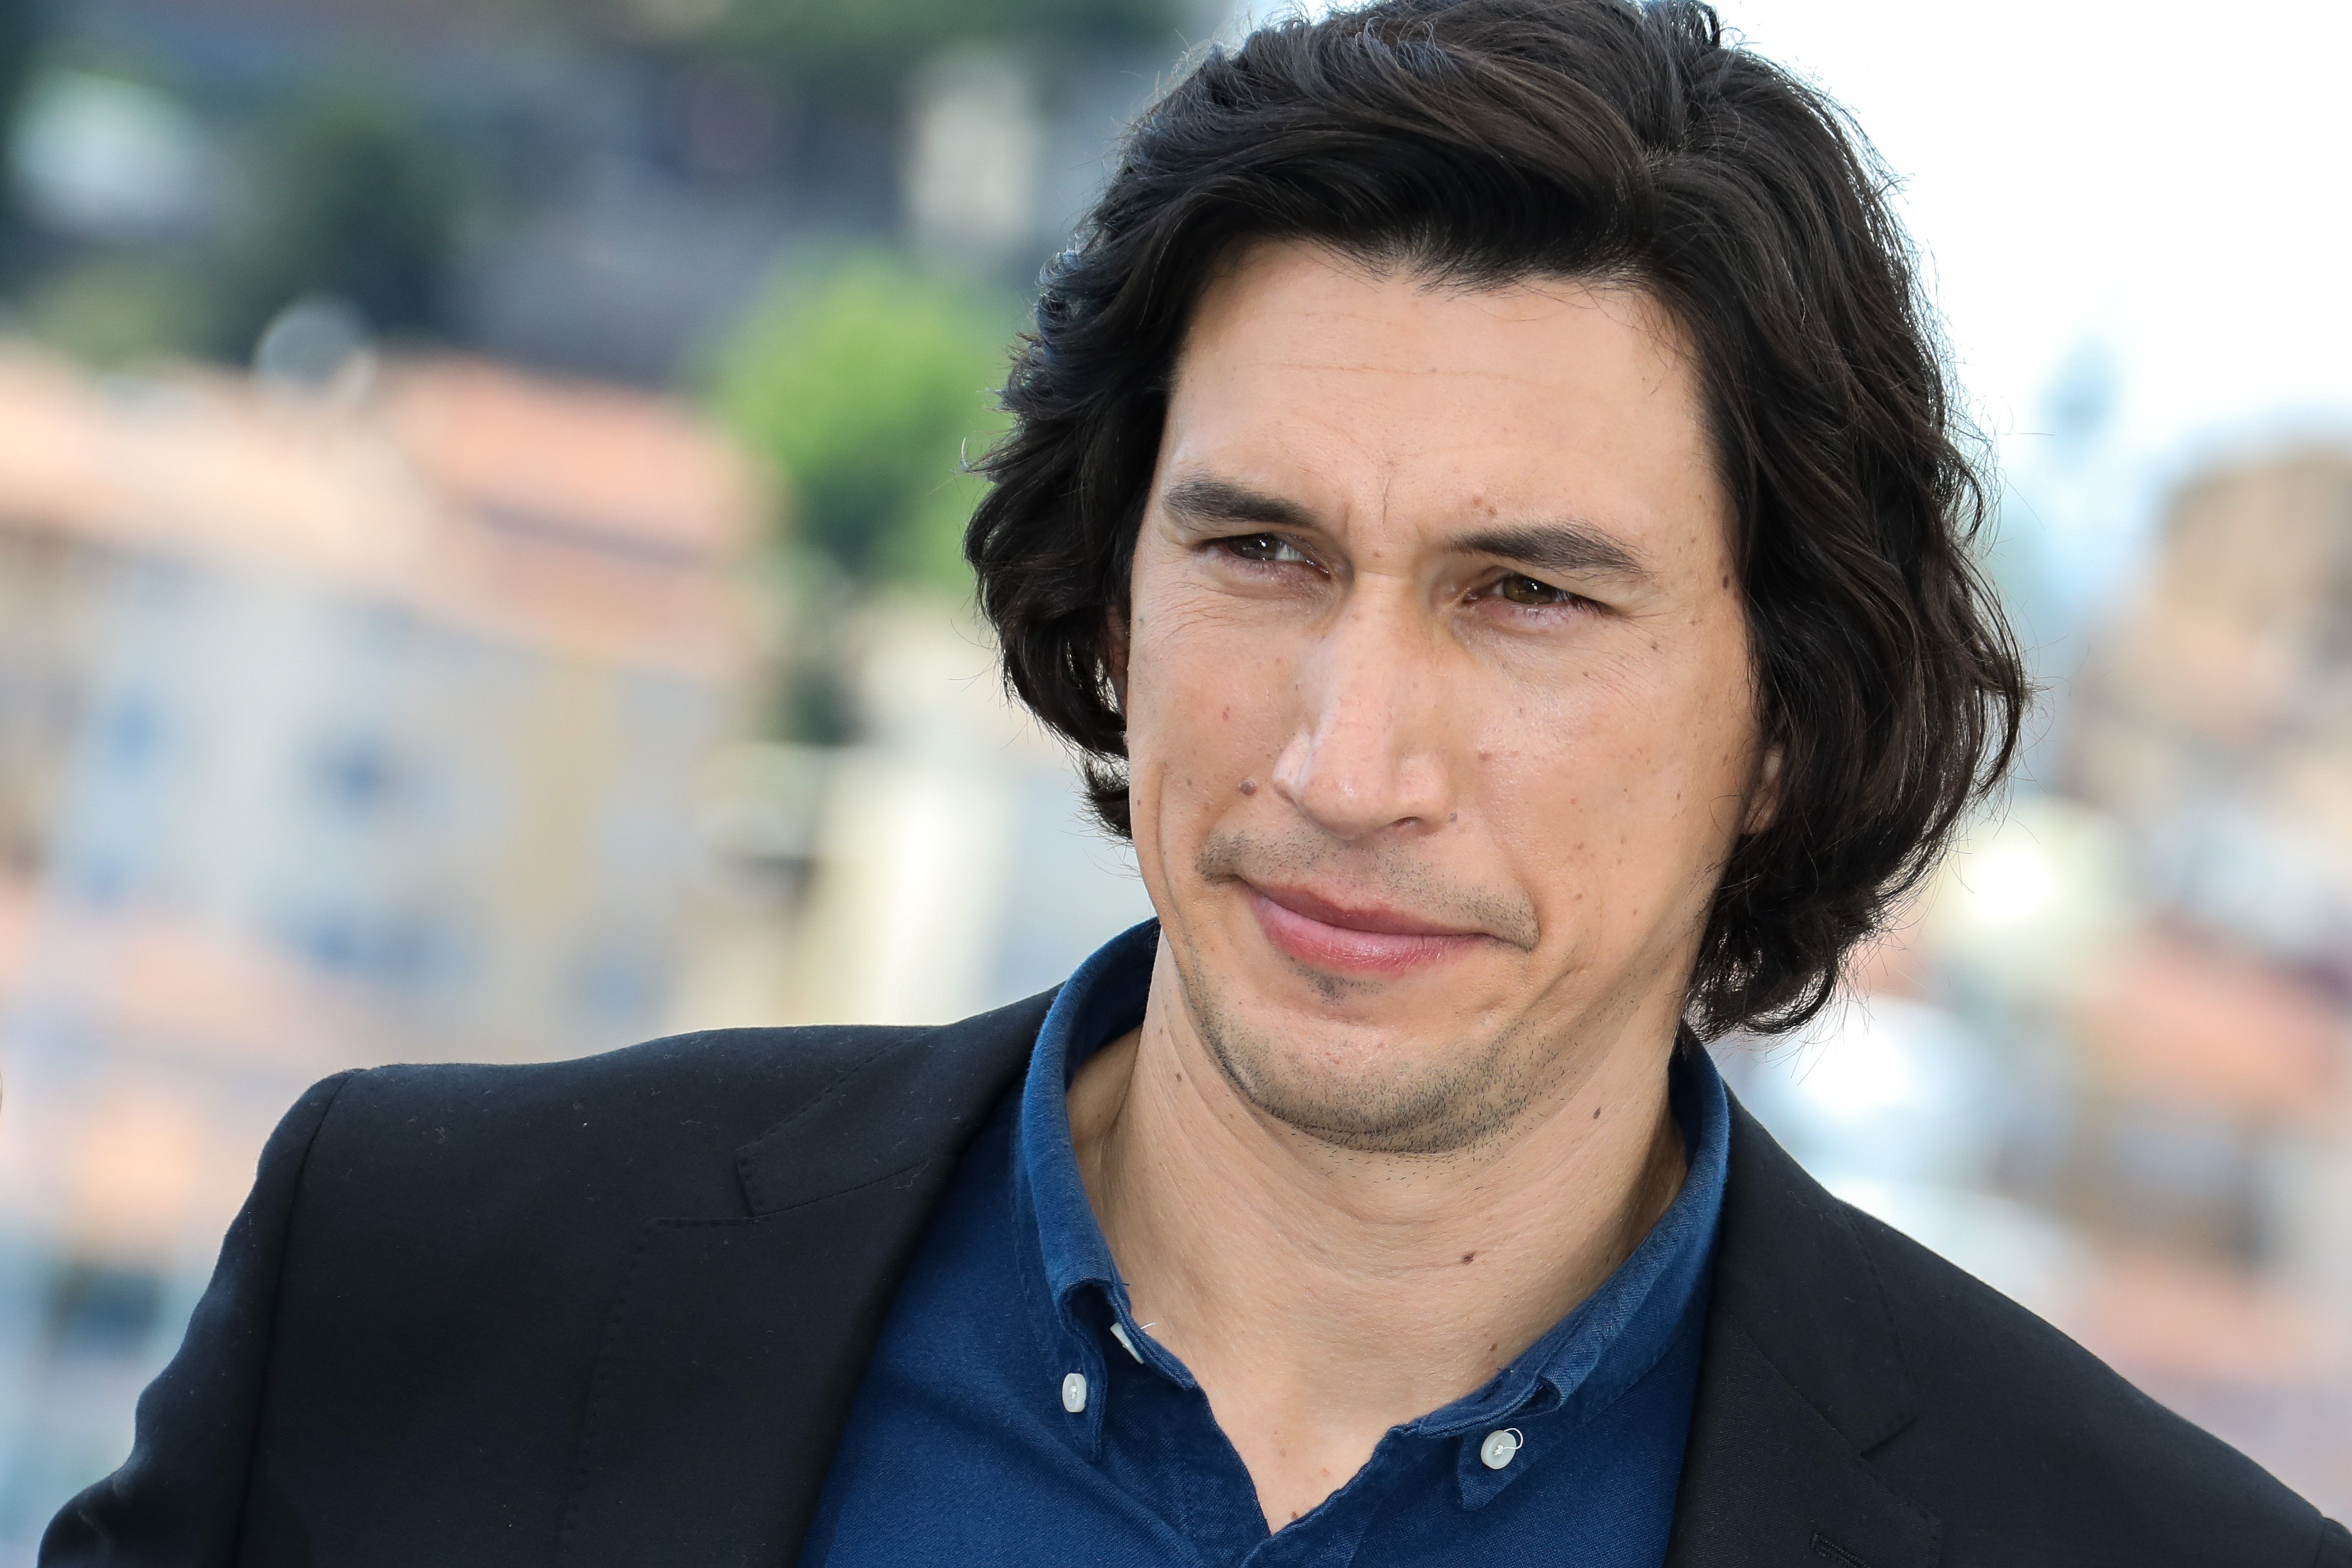 Adam Driver attends the "Annette" in Cannes, France